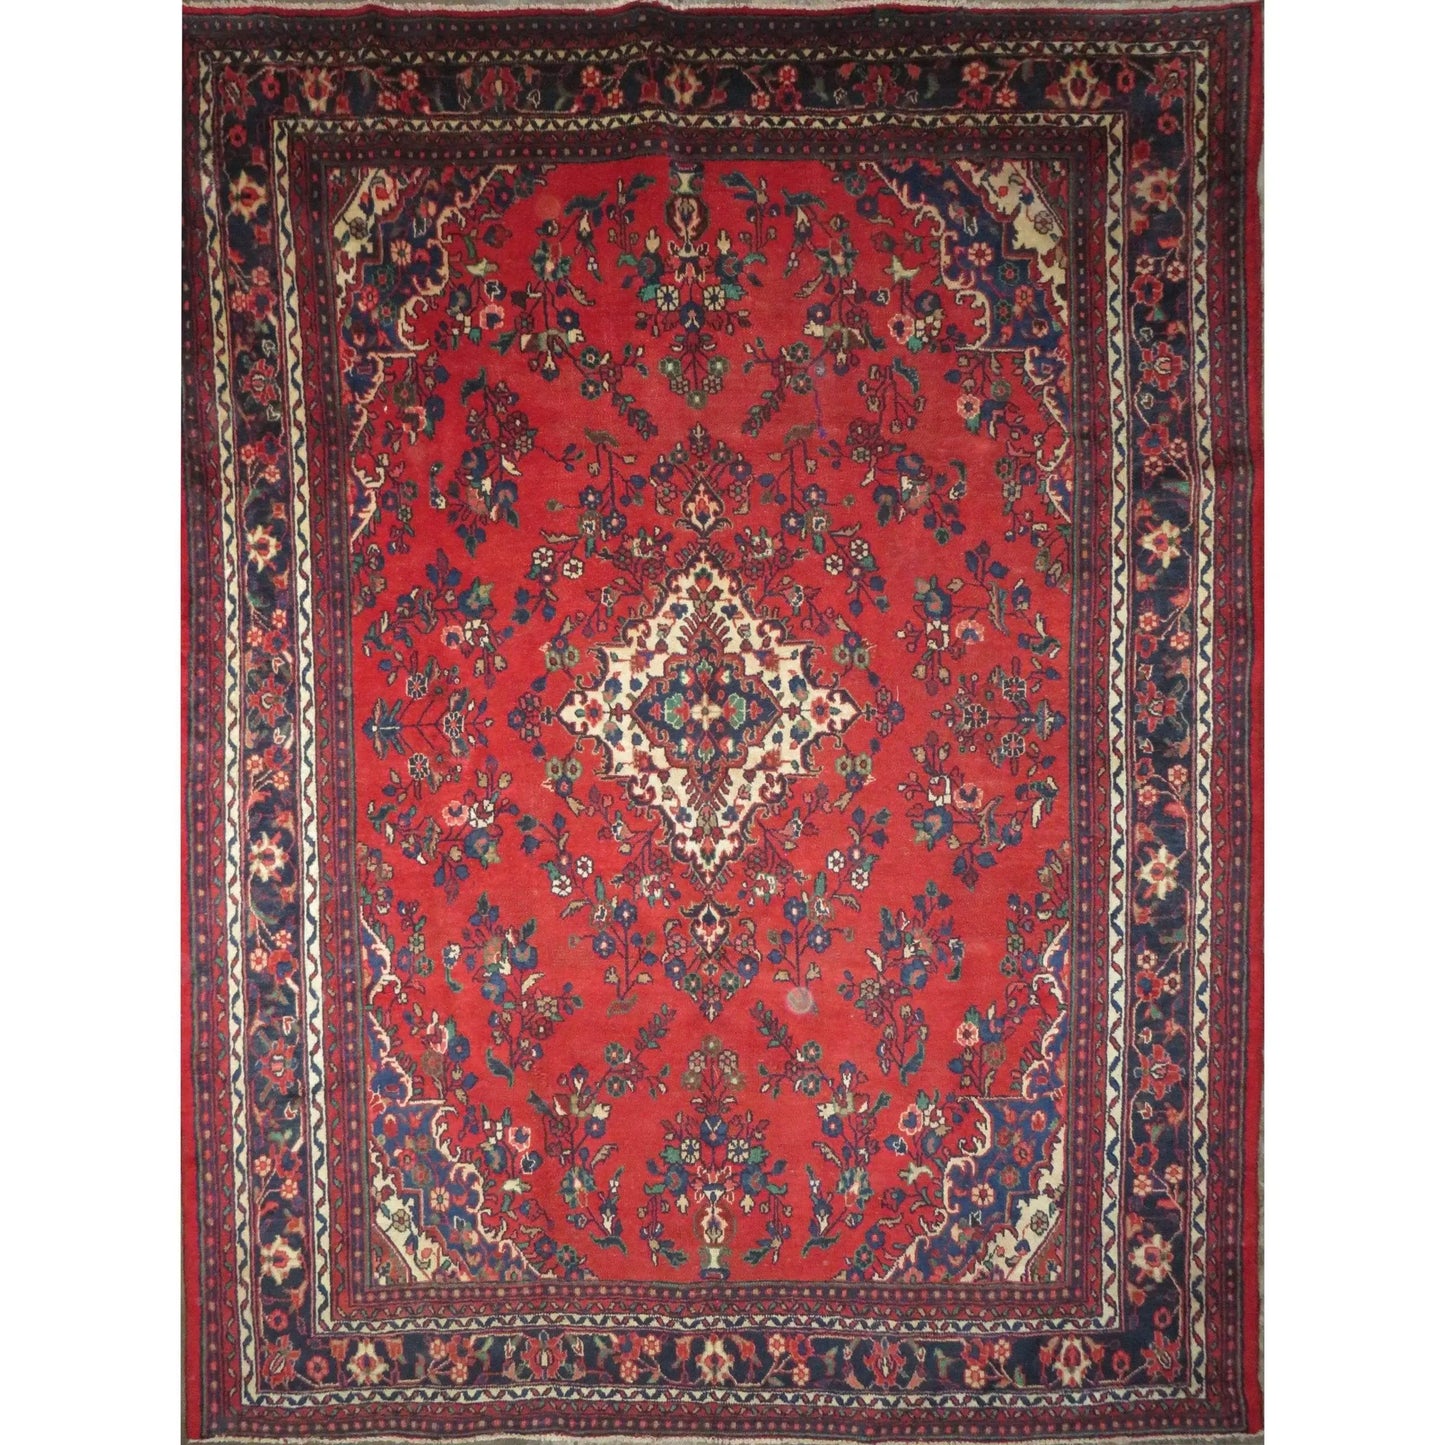 Hand-Knotted Persian Wool Rug _ Luxurious Vintage Design, 11'5" x 8'6", Artisan Crafted